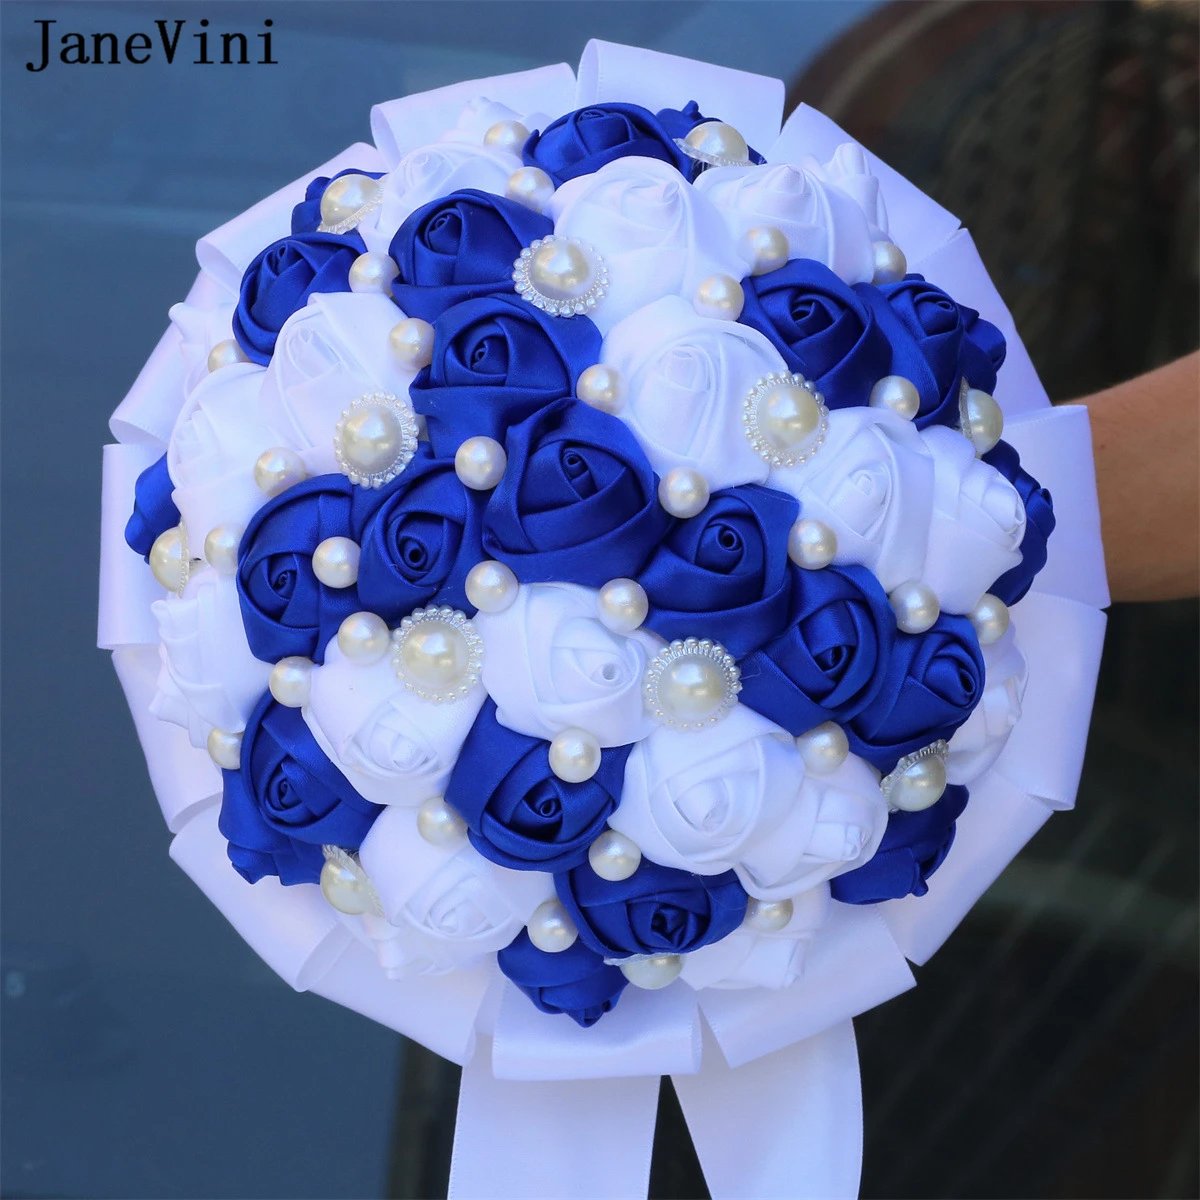 

JaneVini Charming Royal Blue White Flowers Bridal Bouquets Pearls Artificial Satin Roses Wedding Bouquet Accessories for Bride